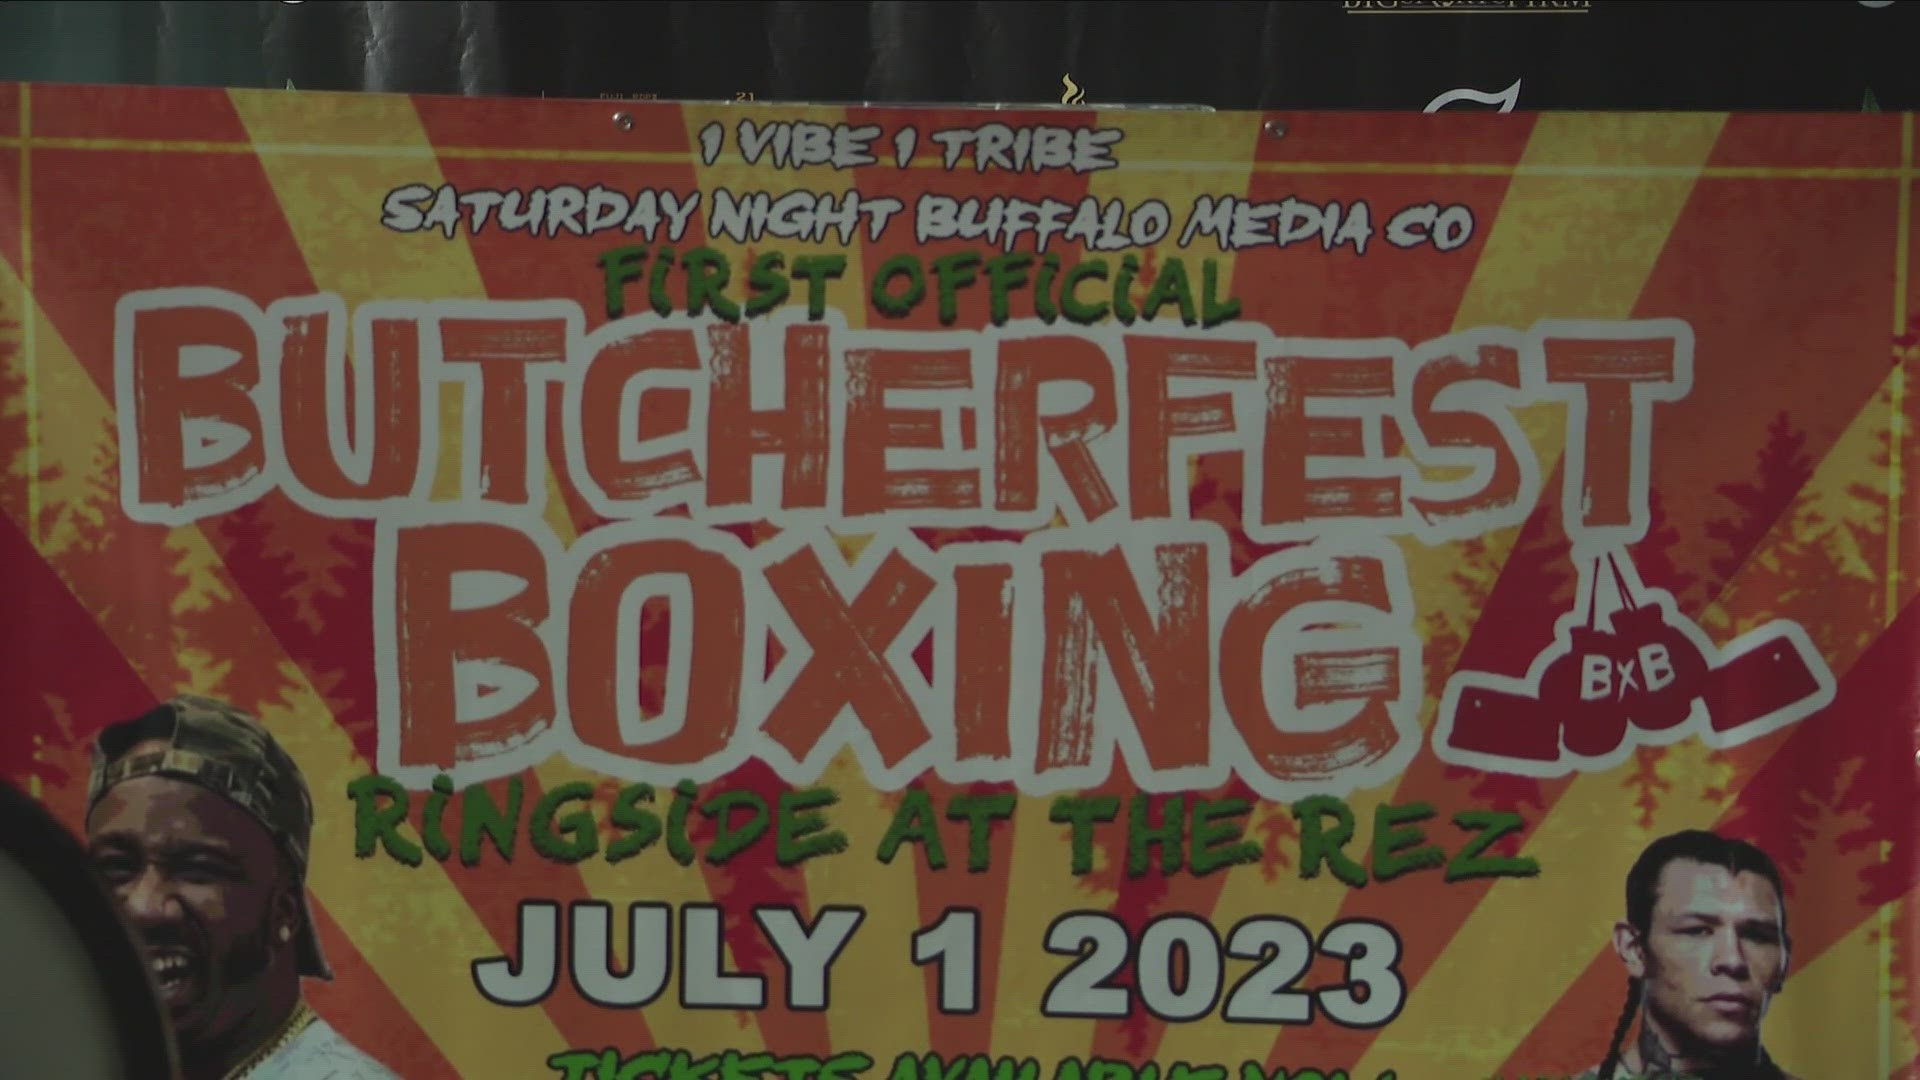 The first Butcher Fest boxing match is July 1st